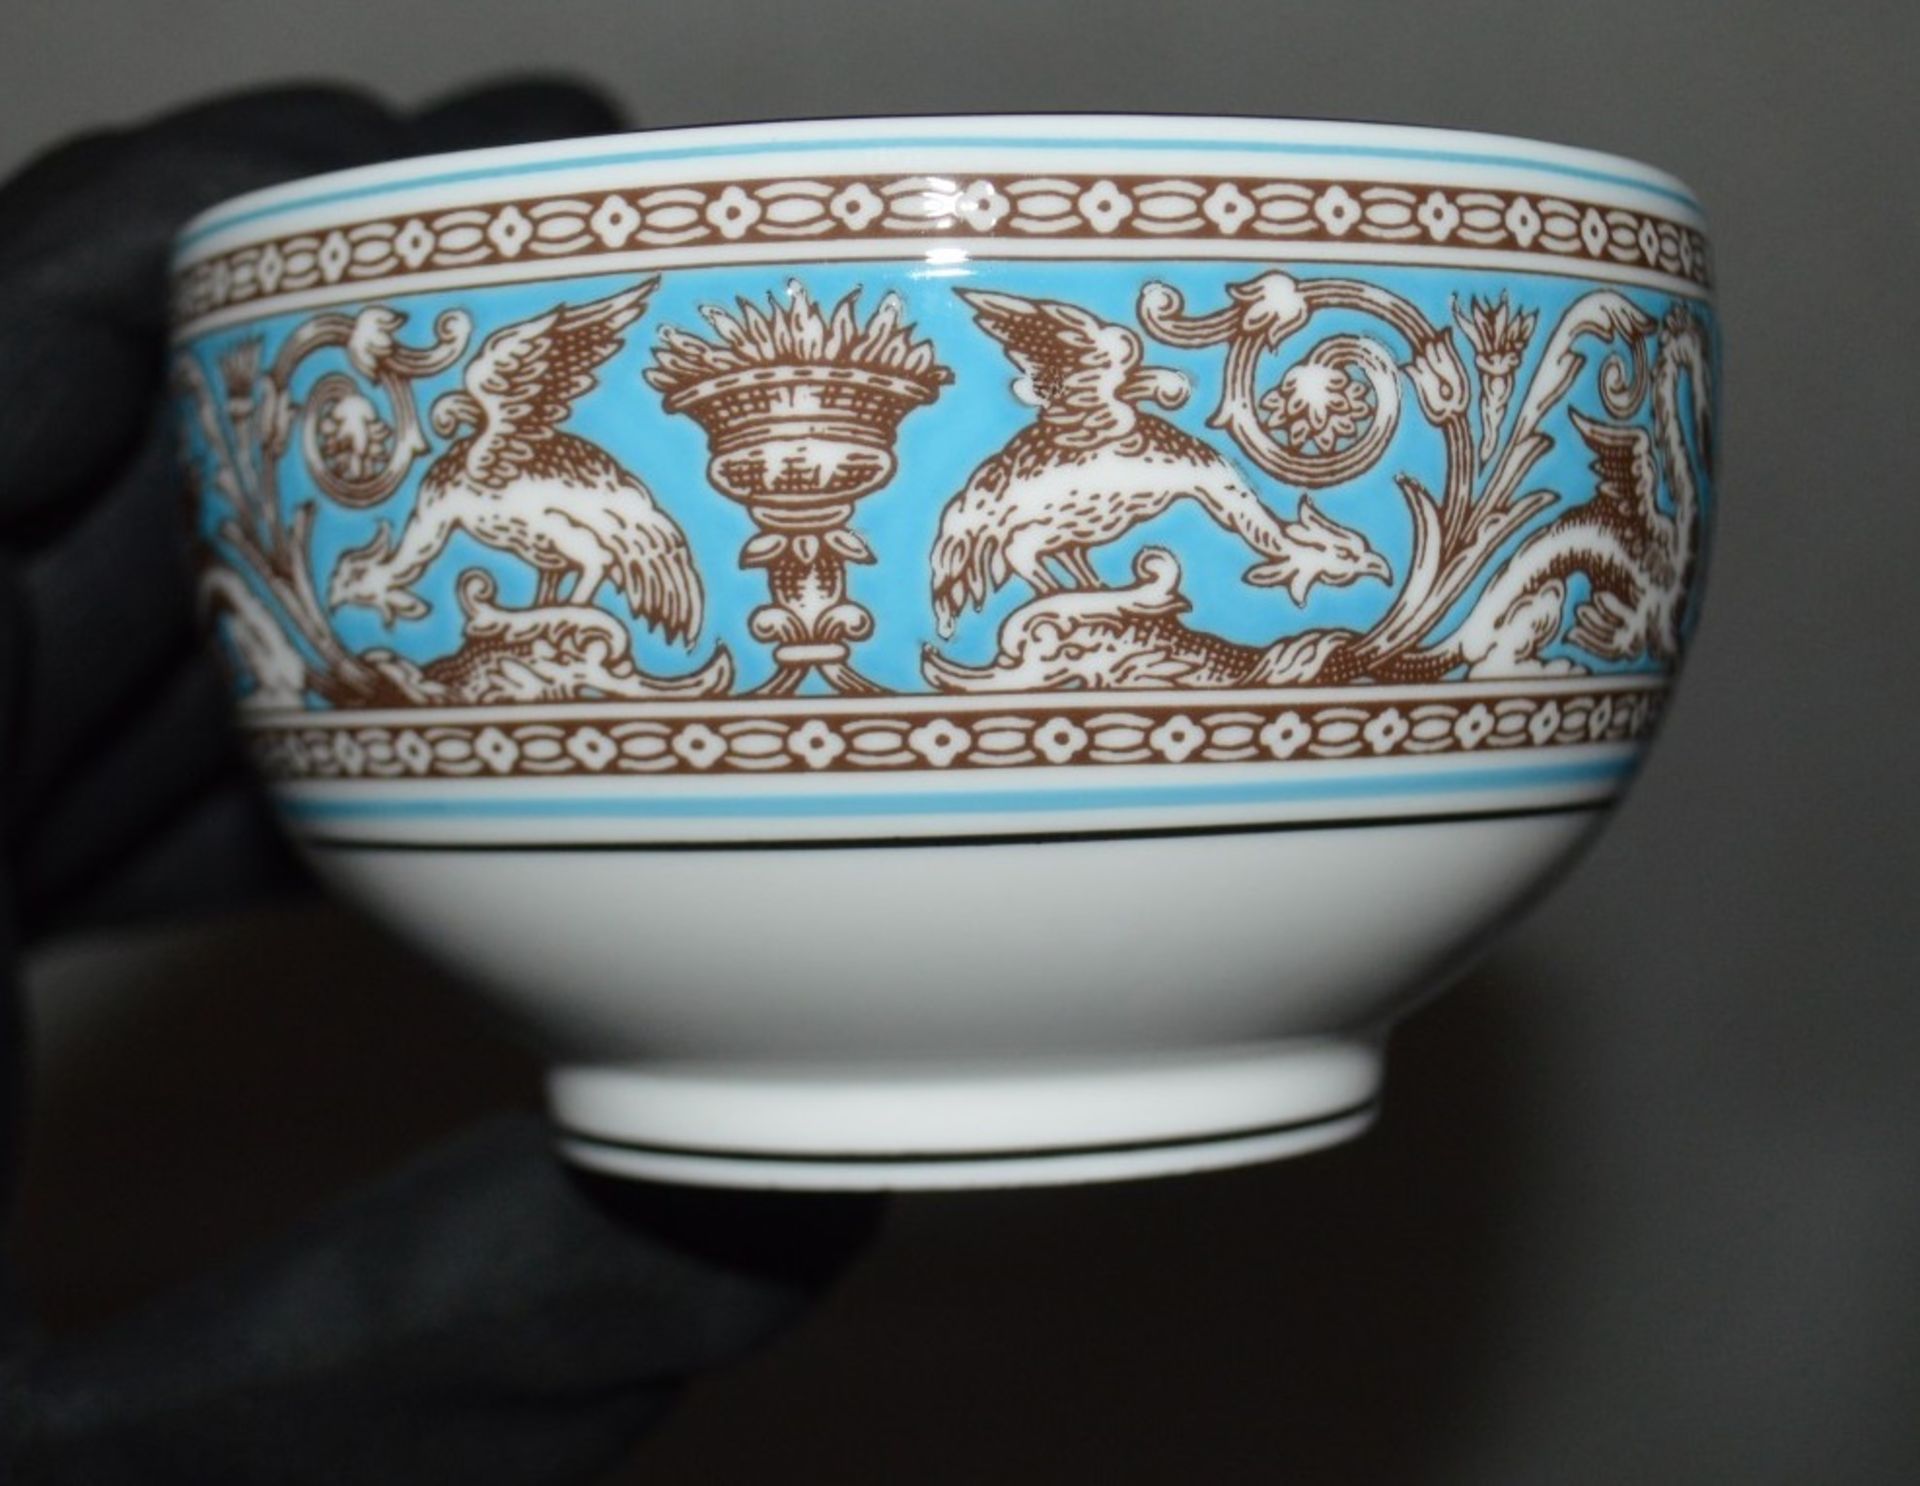 1 x WEDGWOOD Florentine Turquoise 8-Piece Dinner Set - Original Price £500.00 - See Condition Report - Image 5 of 12